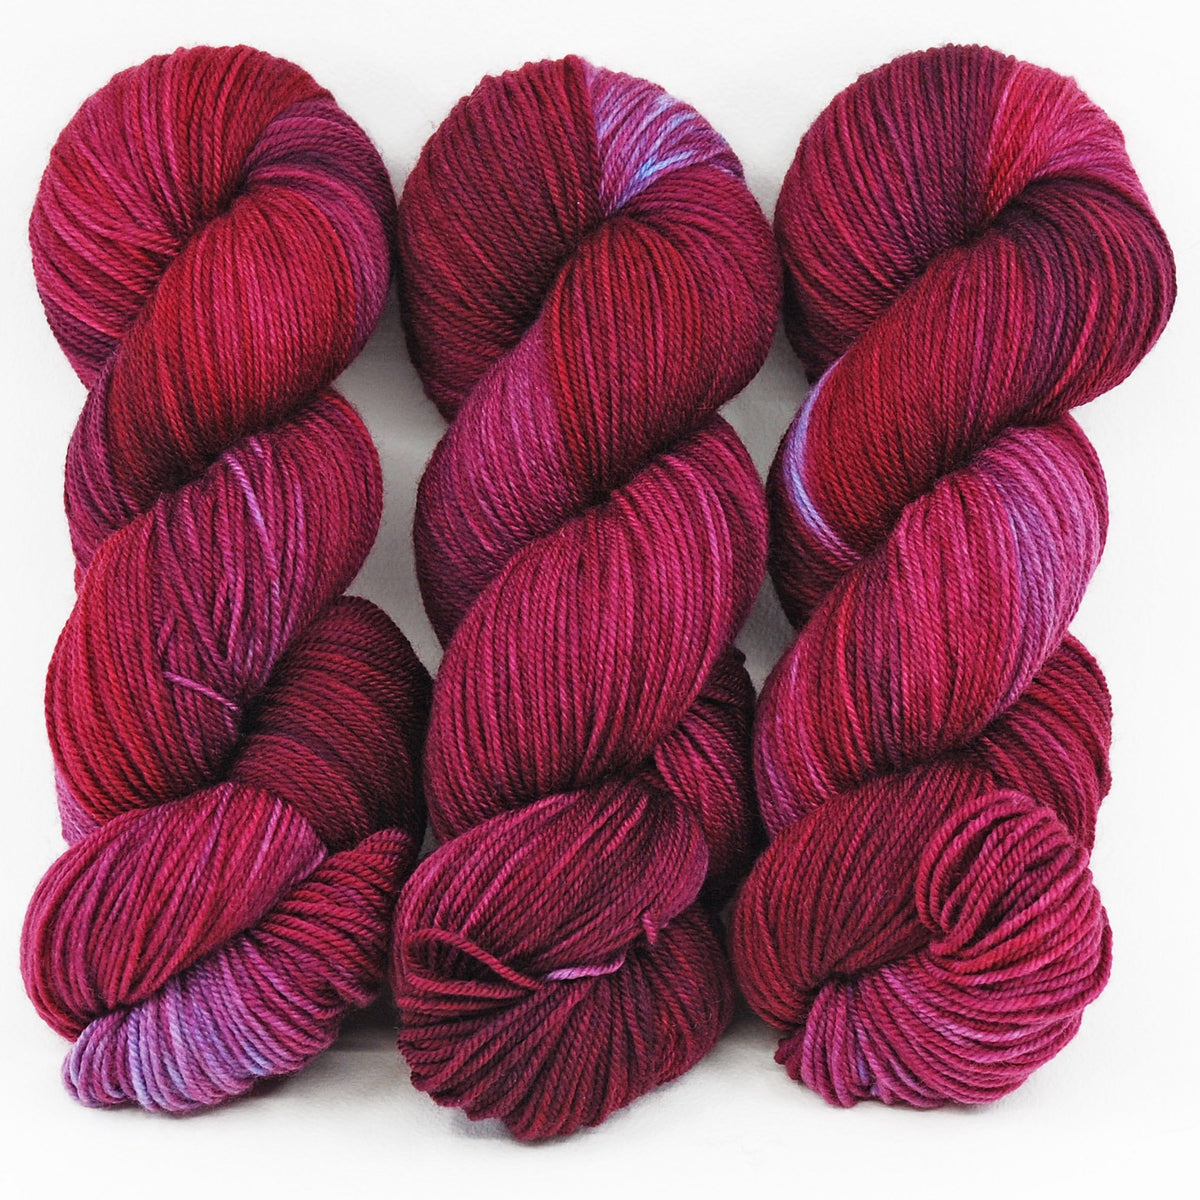 Beaujolais Nouveau - Revival Worsted - Dyed Stock